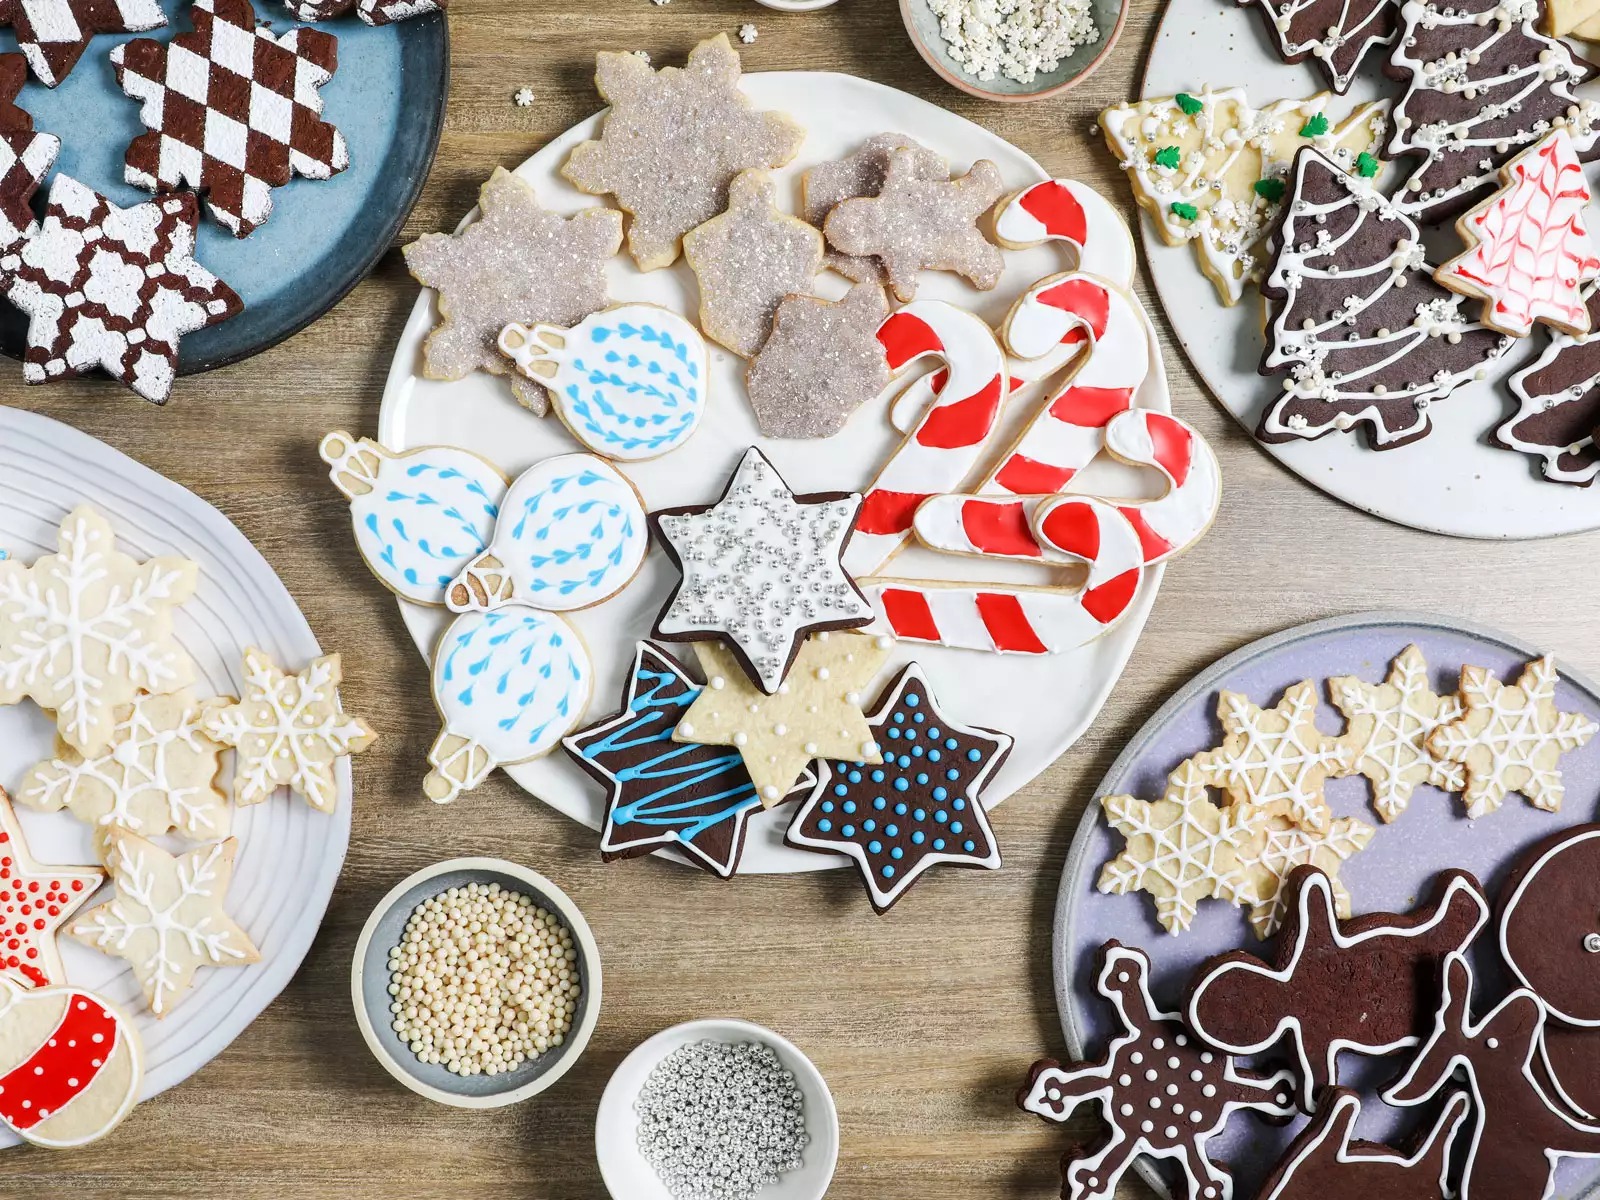 It’s Time to Find Out What Your 🥳 Holiday Vibe Is With the 🎄 Christmas Feast You Plan Holiday frosted sugar cookies